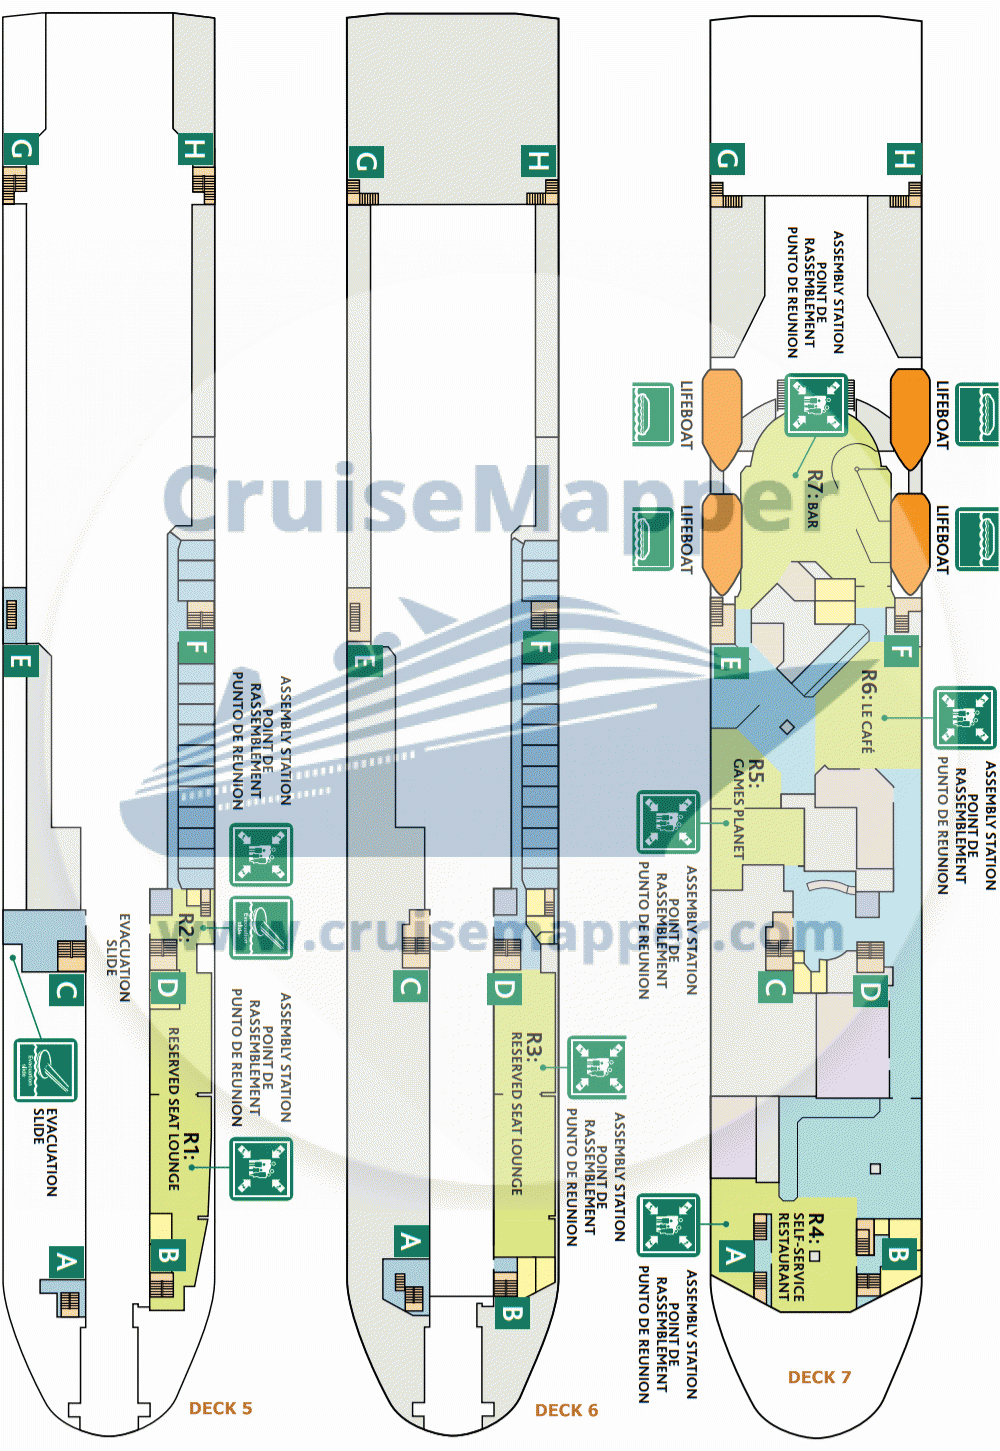 Barfleur ferry deck plans 5-6-7 (muster stations)